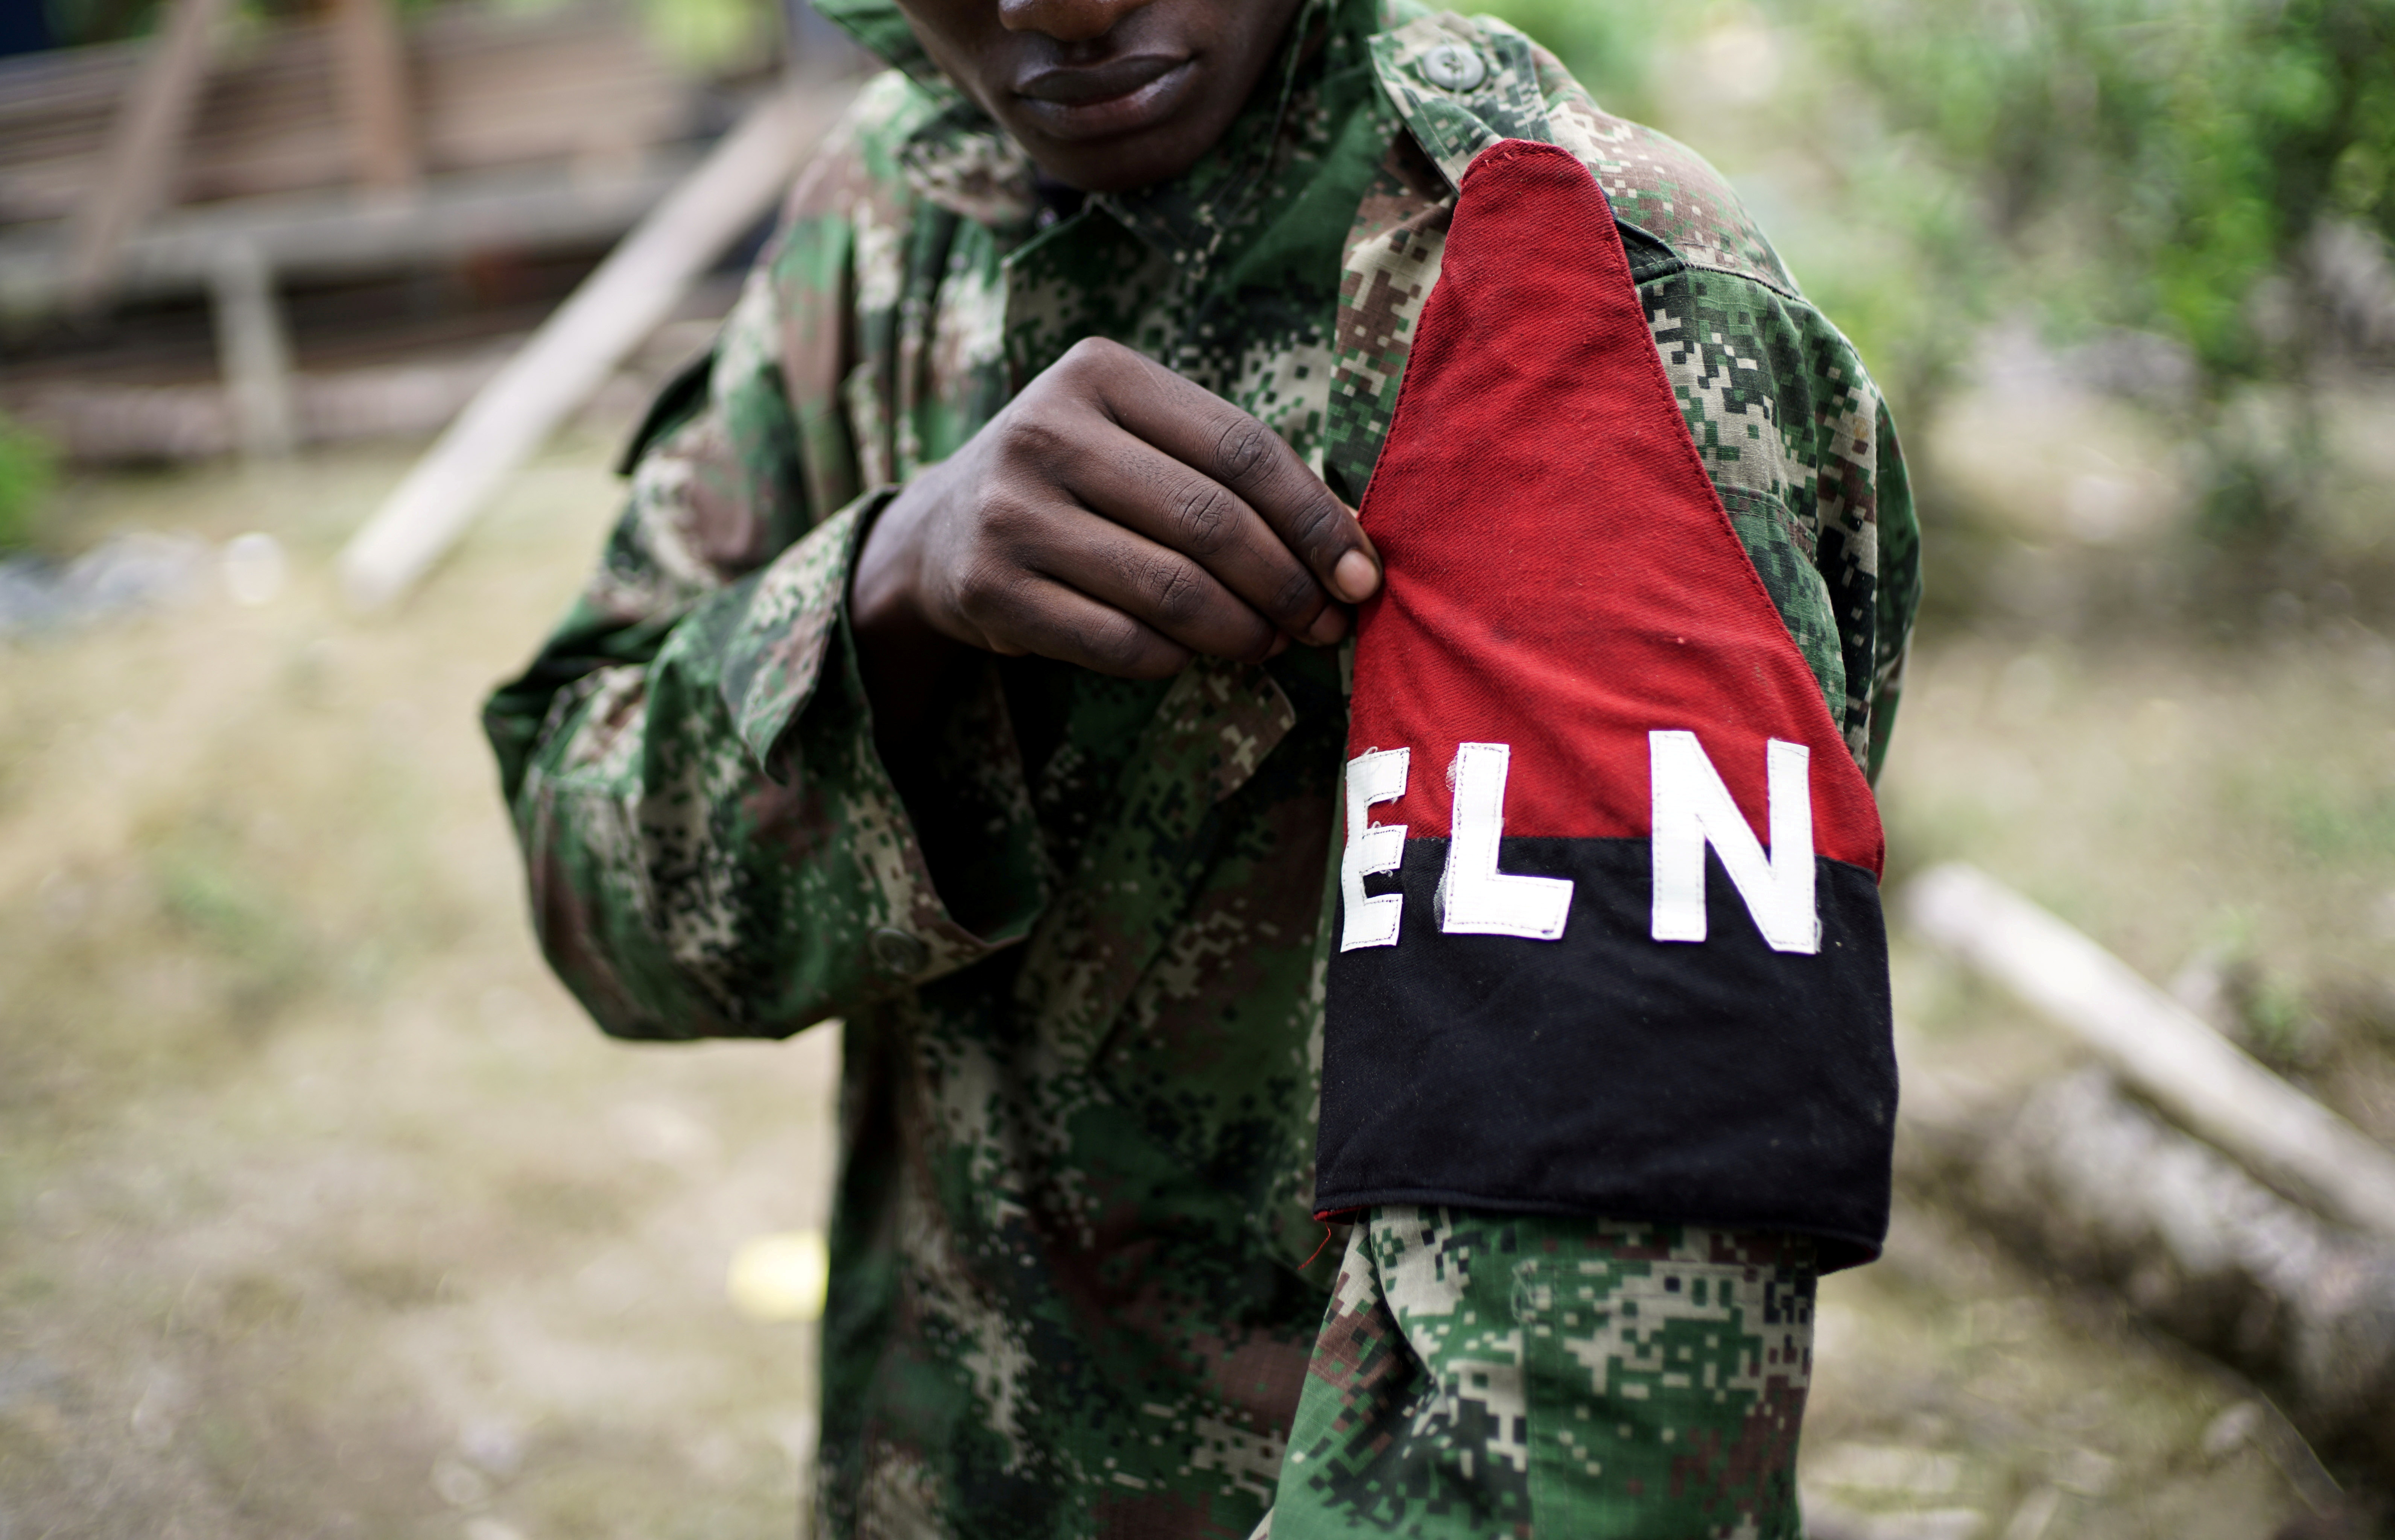 A rebel of Colombia's Marxist National Liberation Army shows his armband while posing for a photograph, in the northwestern jungles